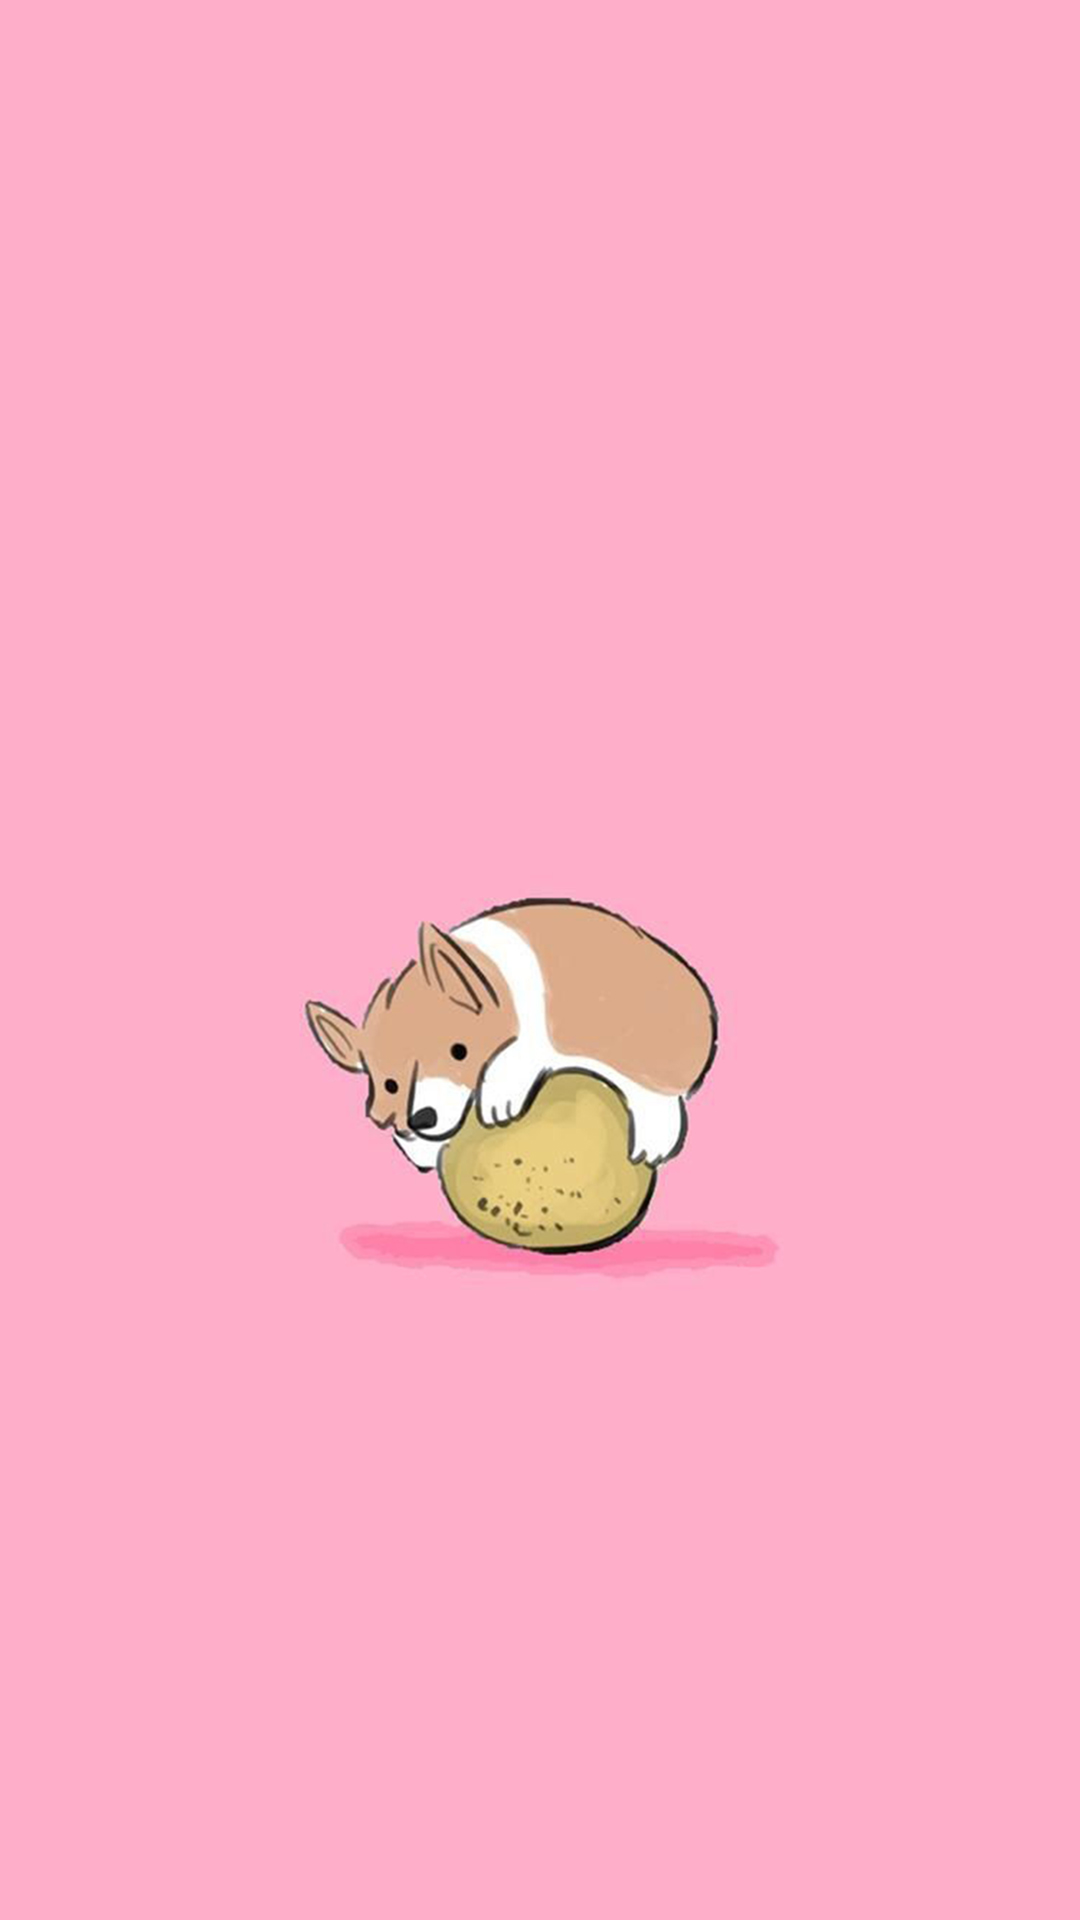 Cute cartoon dog wallpapers for mobile